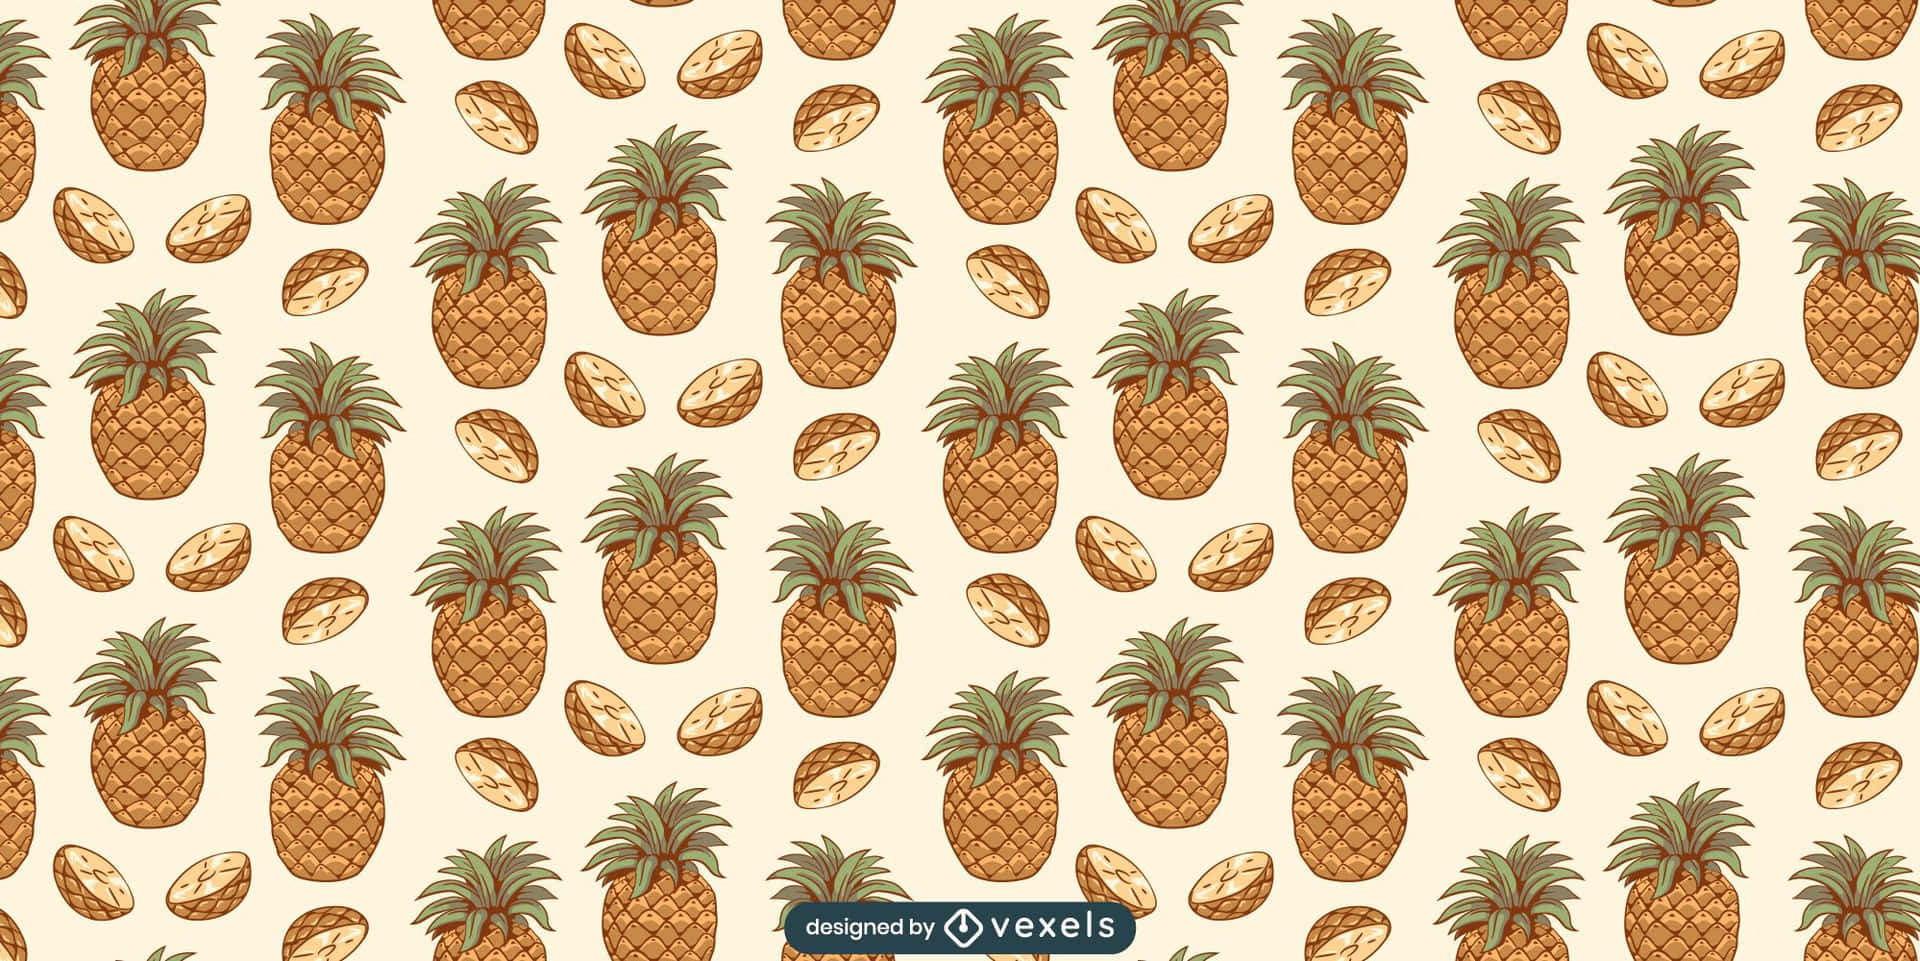 Pineapple Pattern With Nuts And Seeds Wallpaper